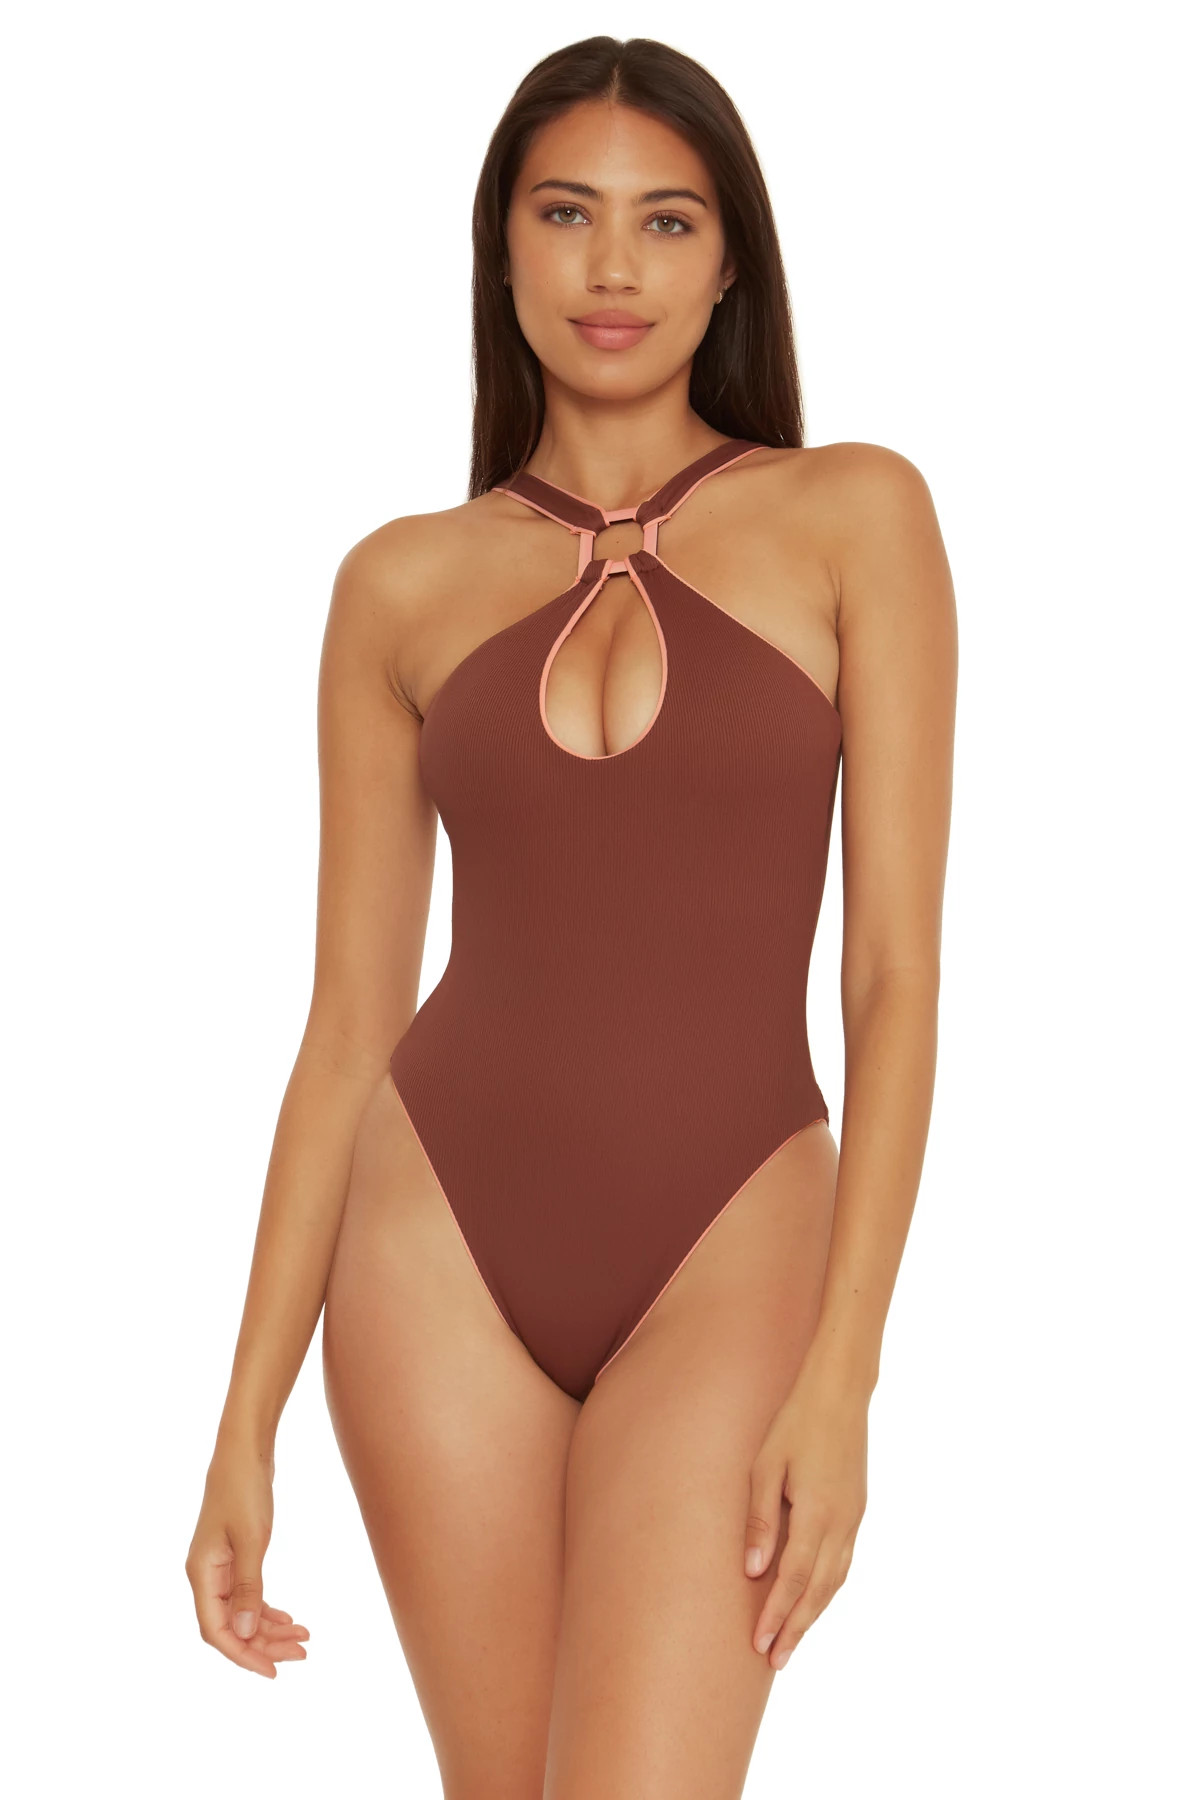 COCONUT Mikayla High Neck One Piece Swimsuit image number 1